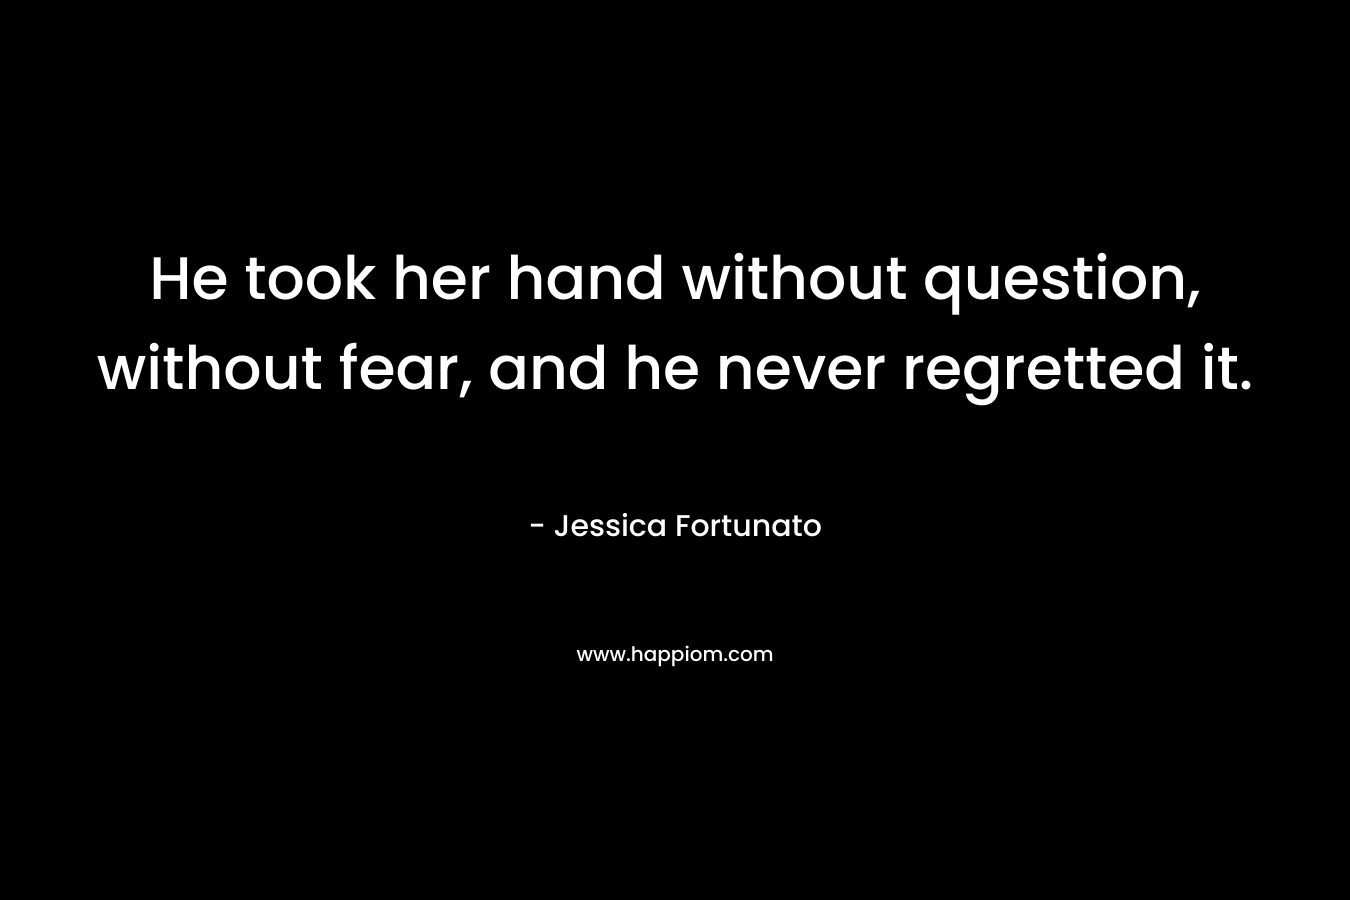 He took her hand without question, without fear, and he never regretted it. – Jessica Fortunato